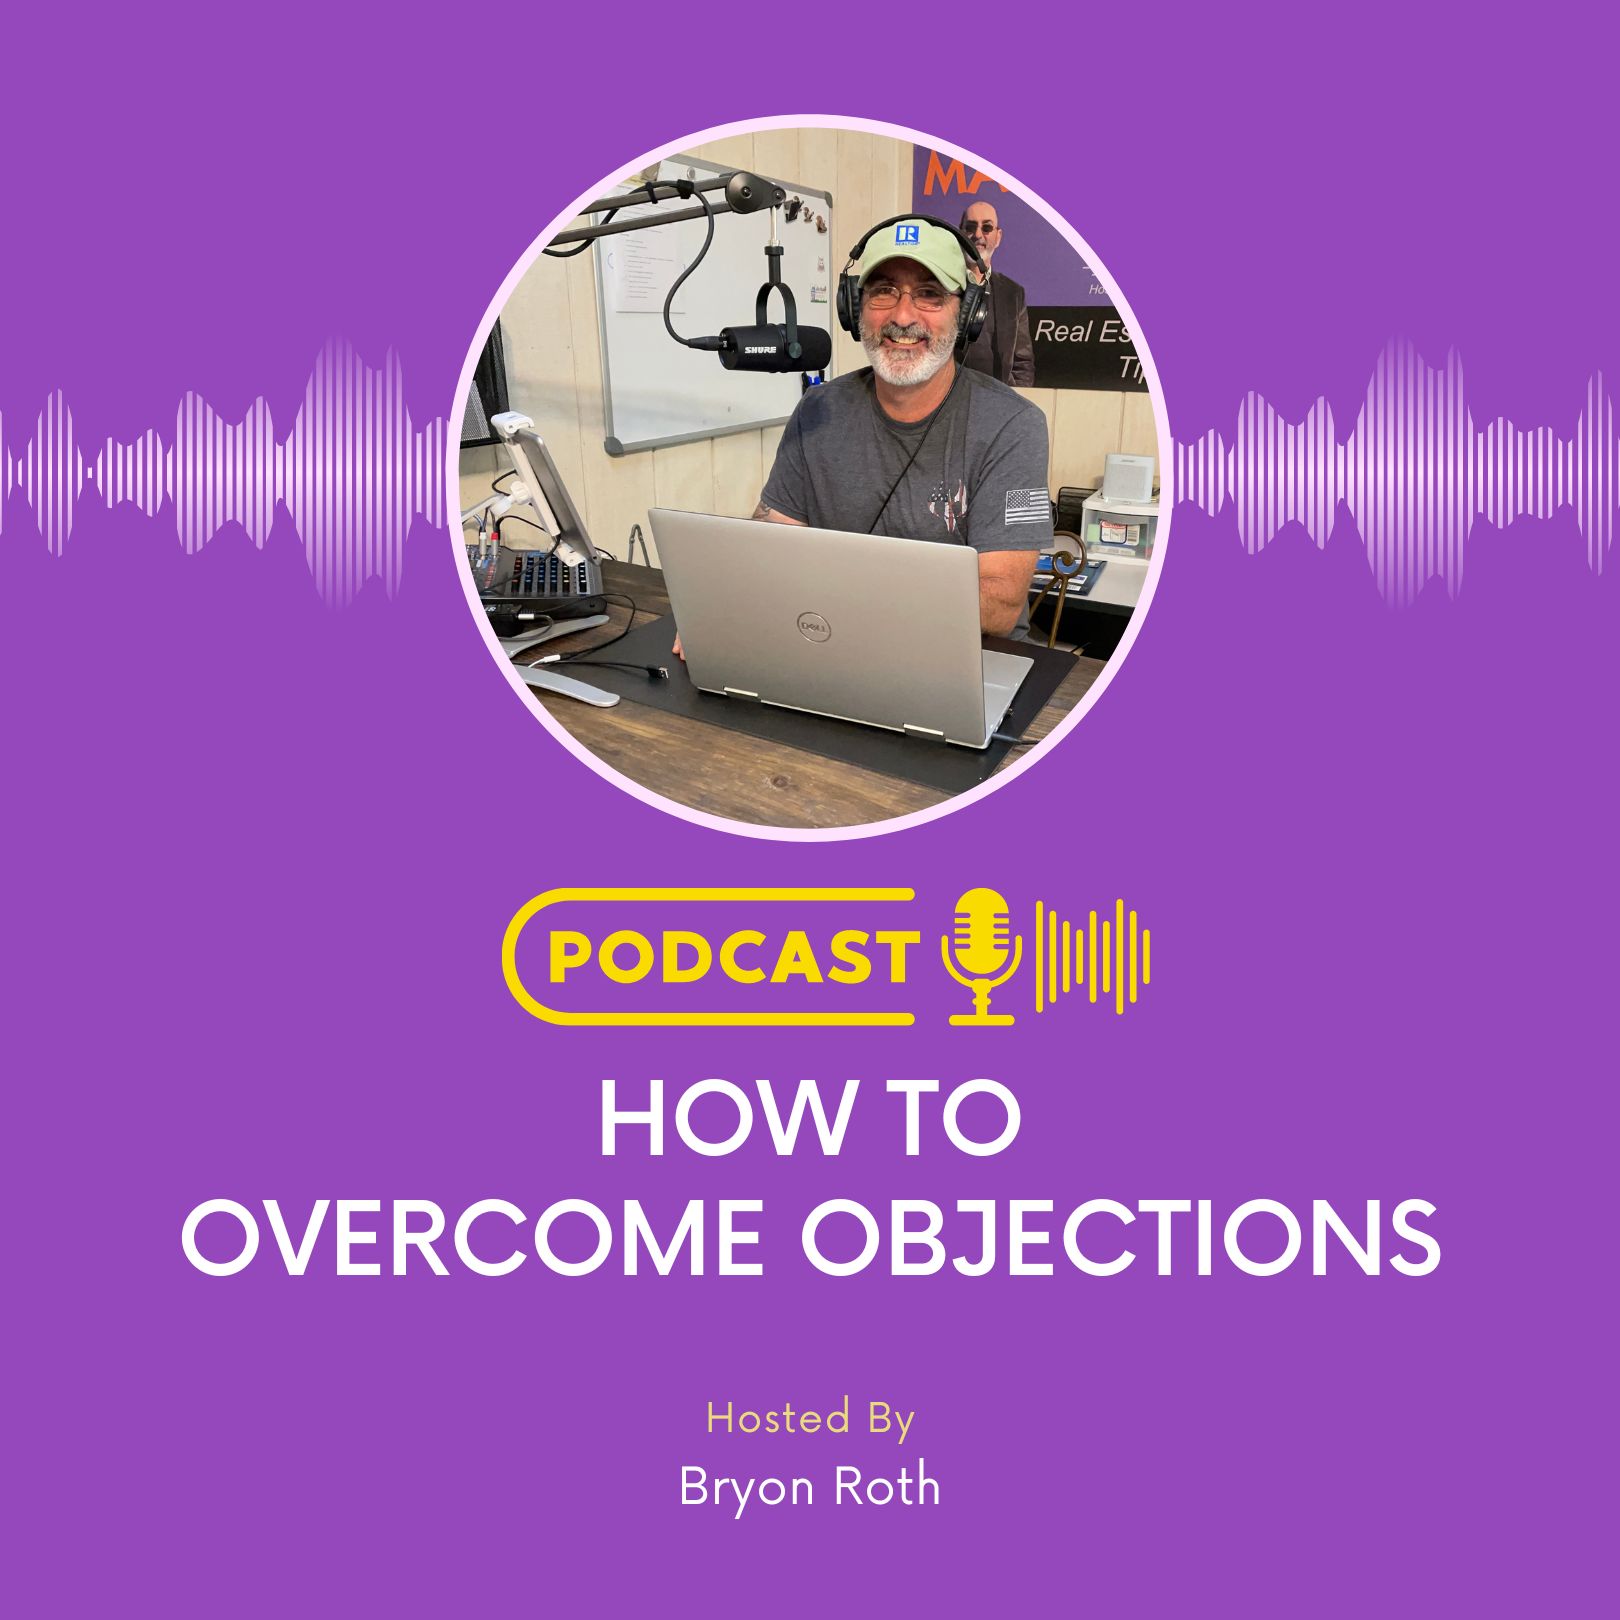 How To Overcome Objections